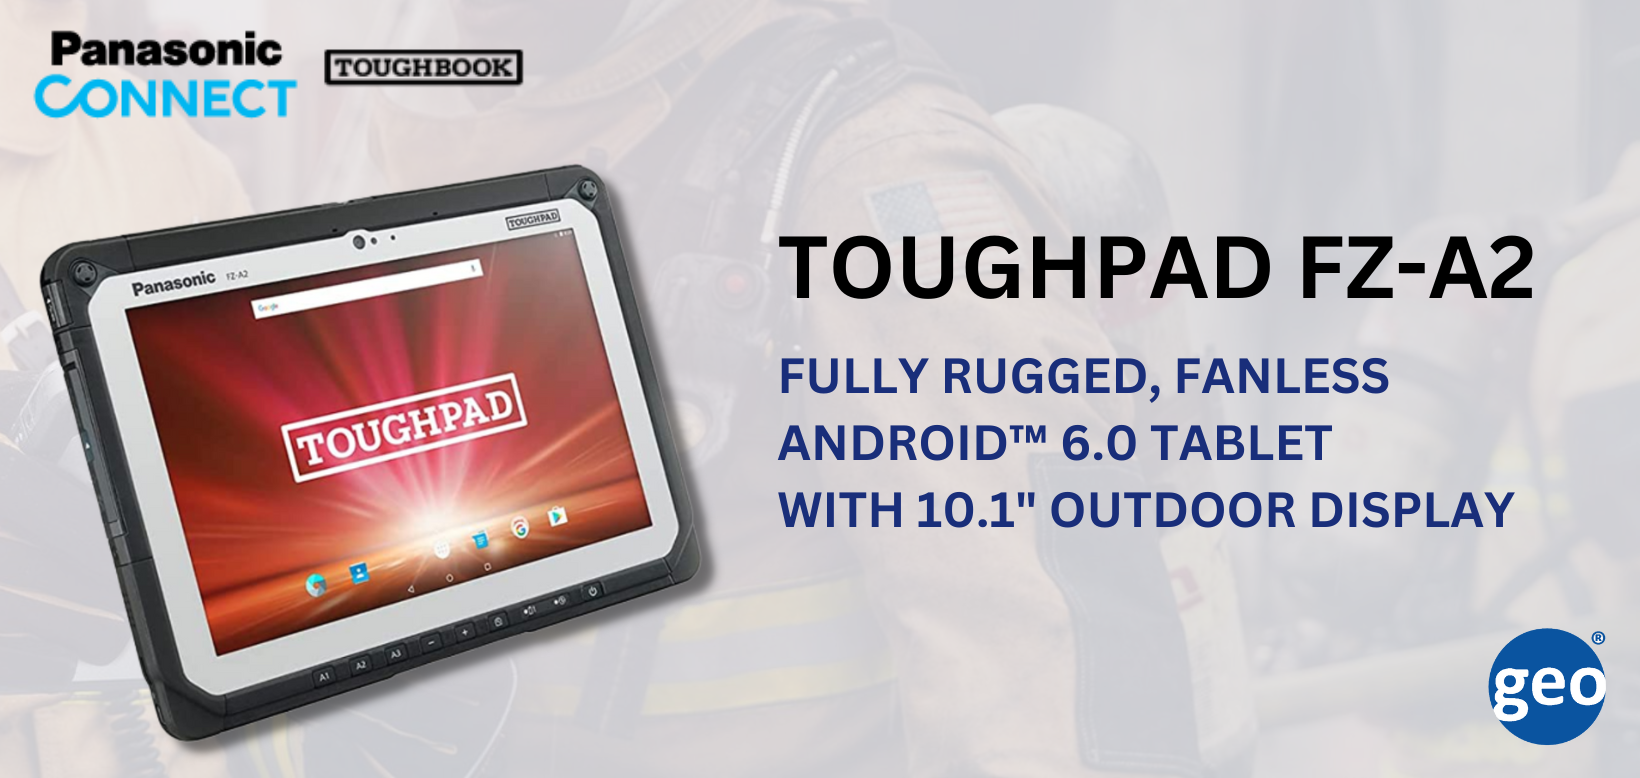 Panasonic: TOUGHPAD FZ-A2 The most Powerful FULLY RUGGED 10.1″ INTEL®-BASED ANDROID™ TABLET Built for Enterprise.